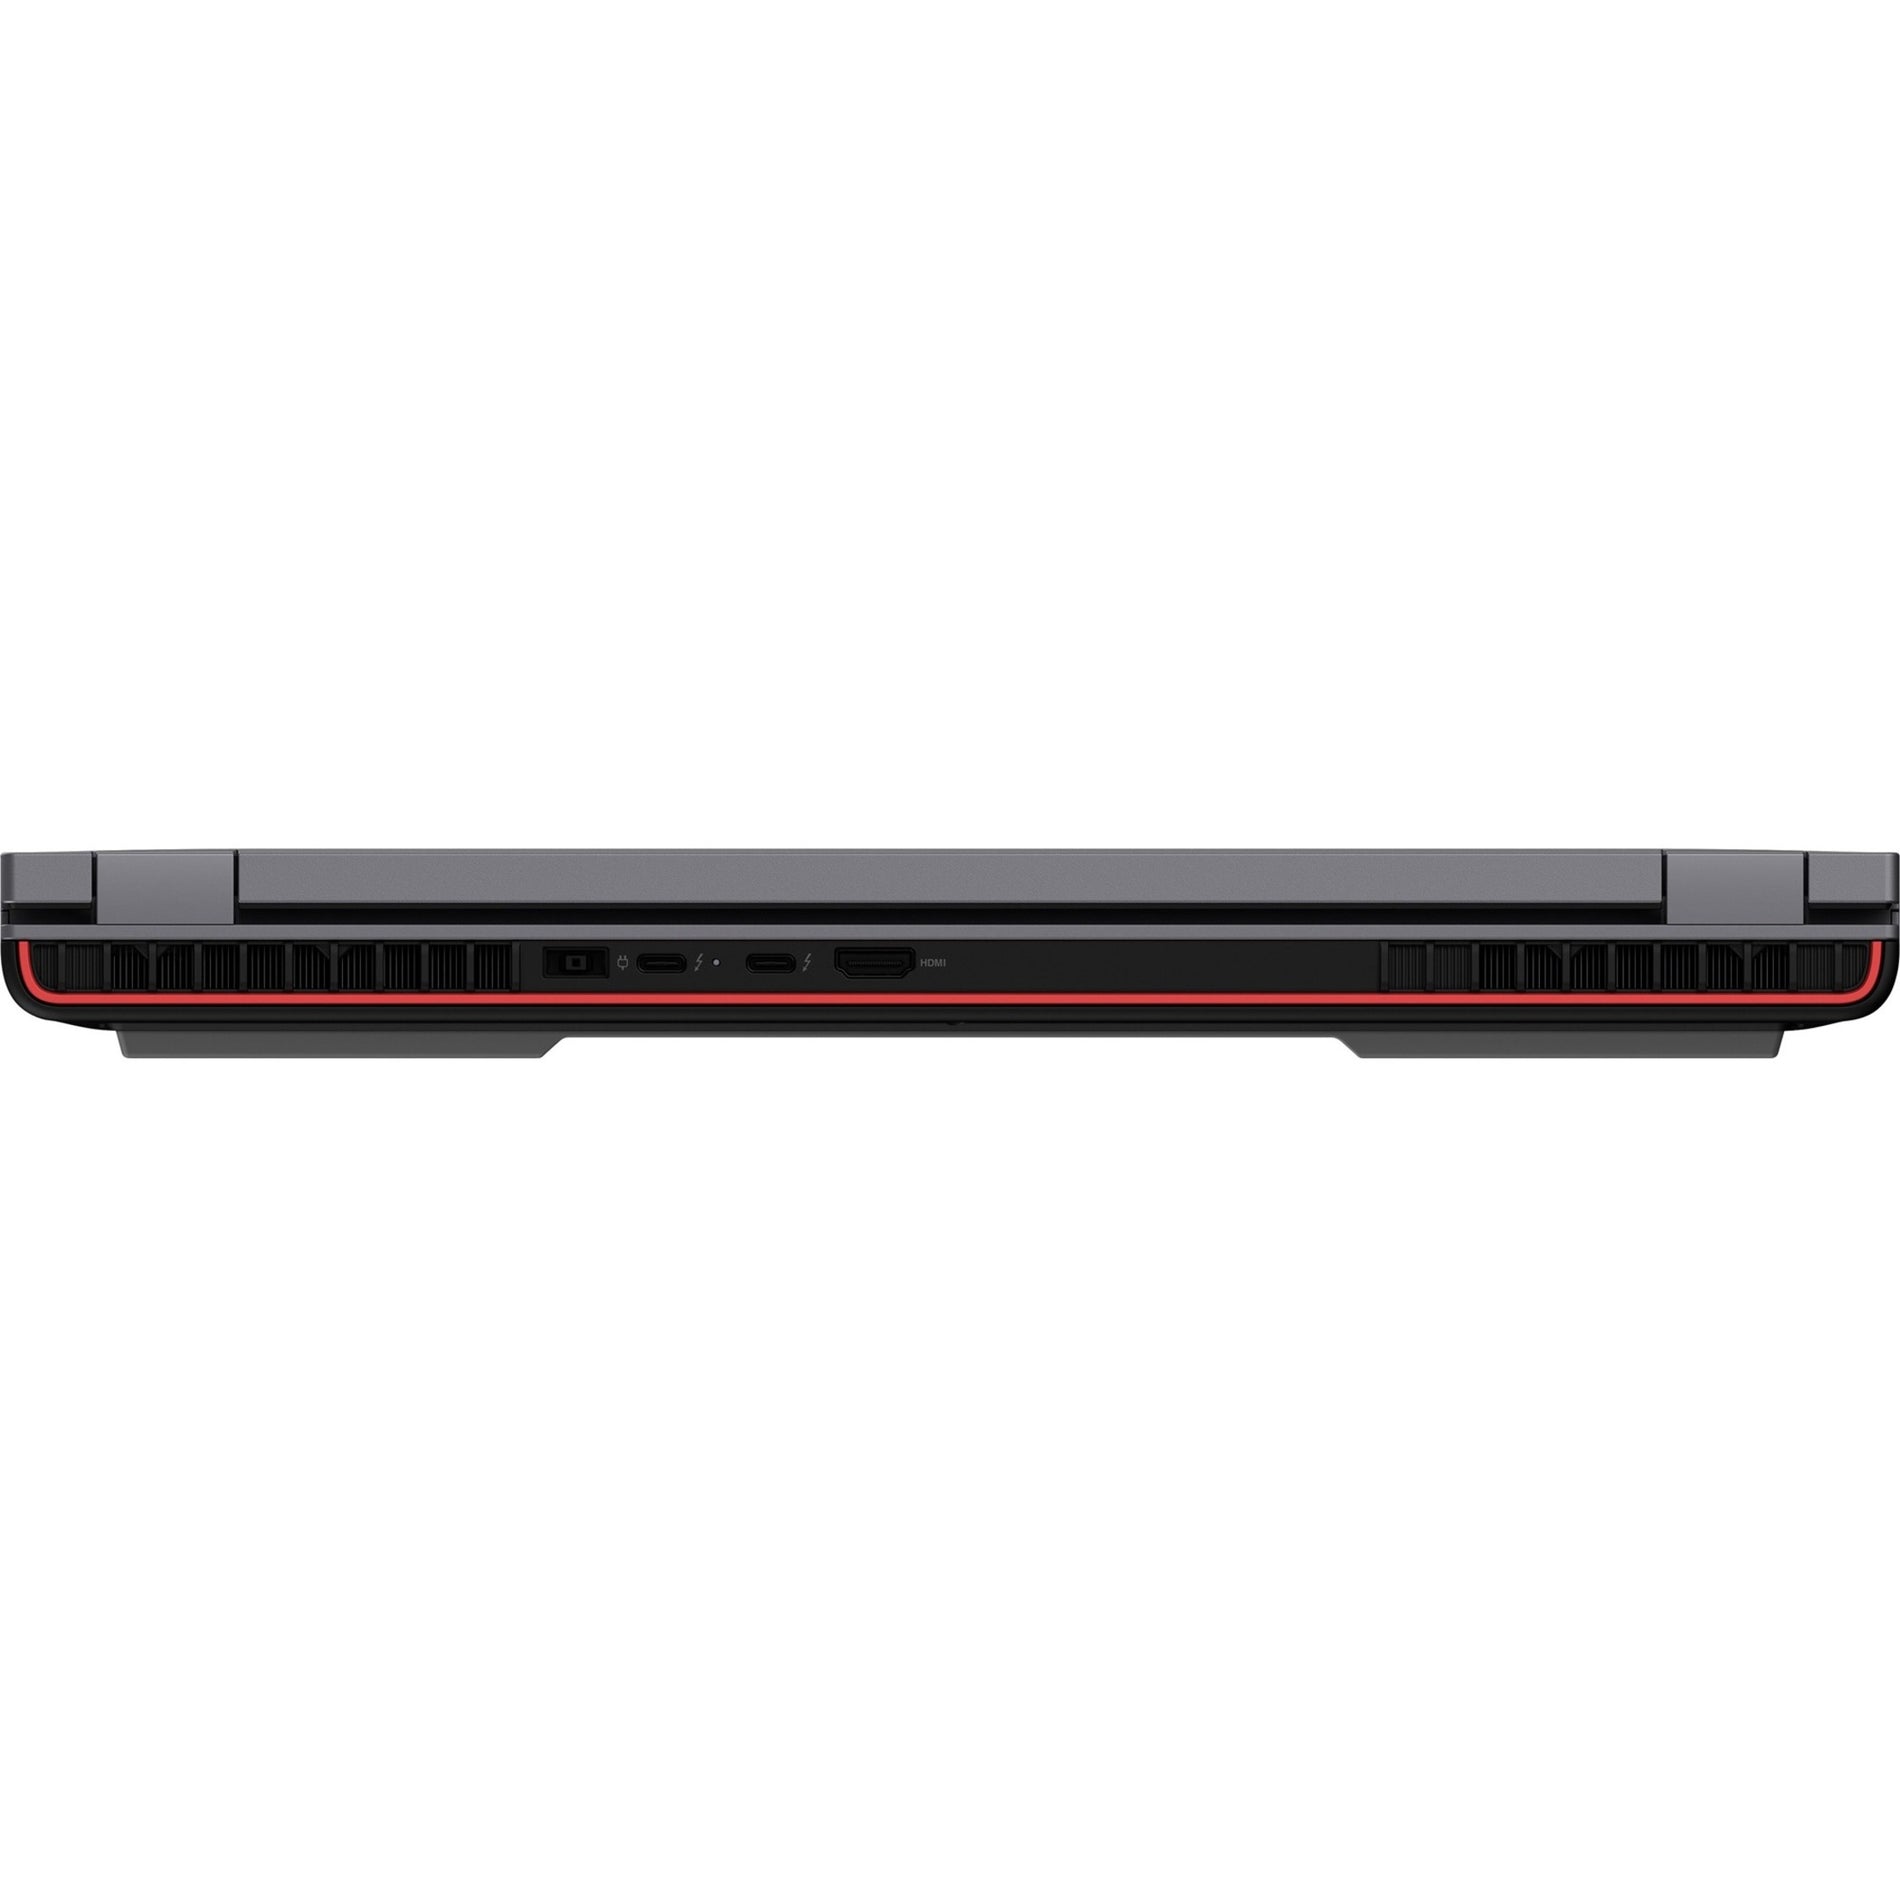 Lenovo ThinkPad P16 G1 21D6008WUS Mobile Workstation [Discontinued]